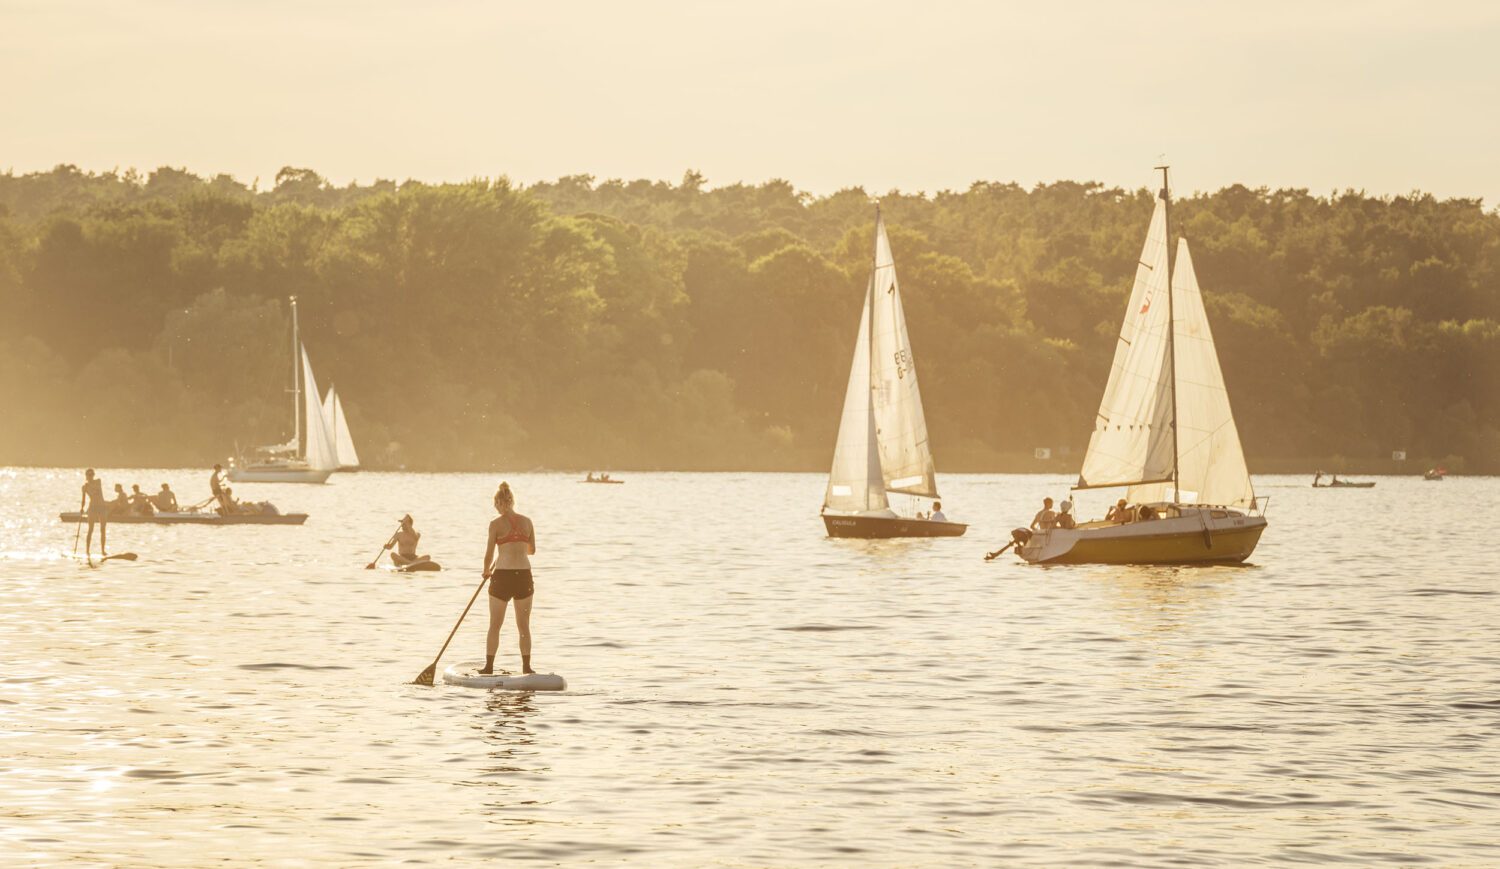 Stand-up paddlers and sailboats at the Wassersportcenter Berlin